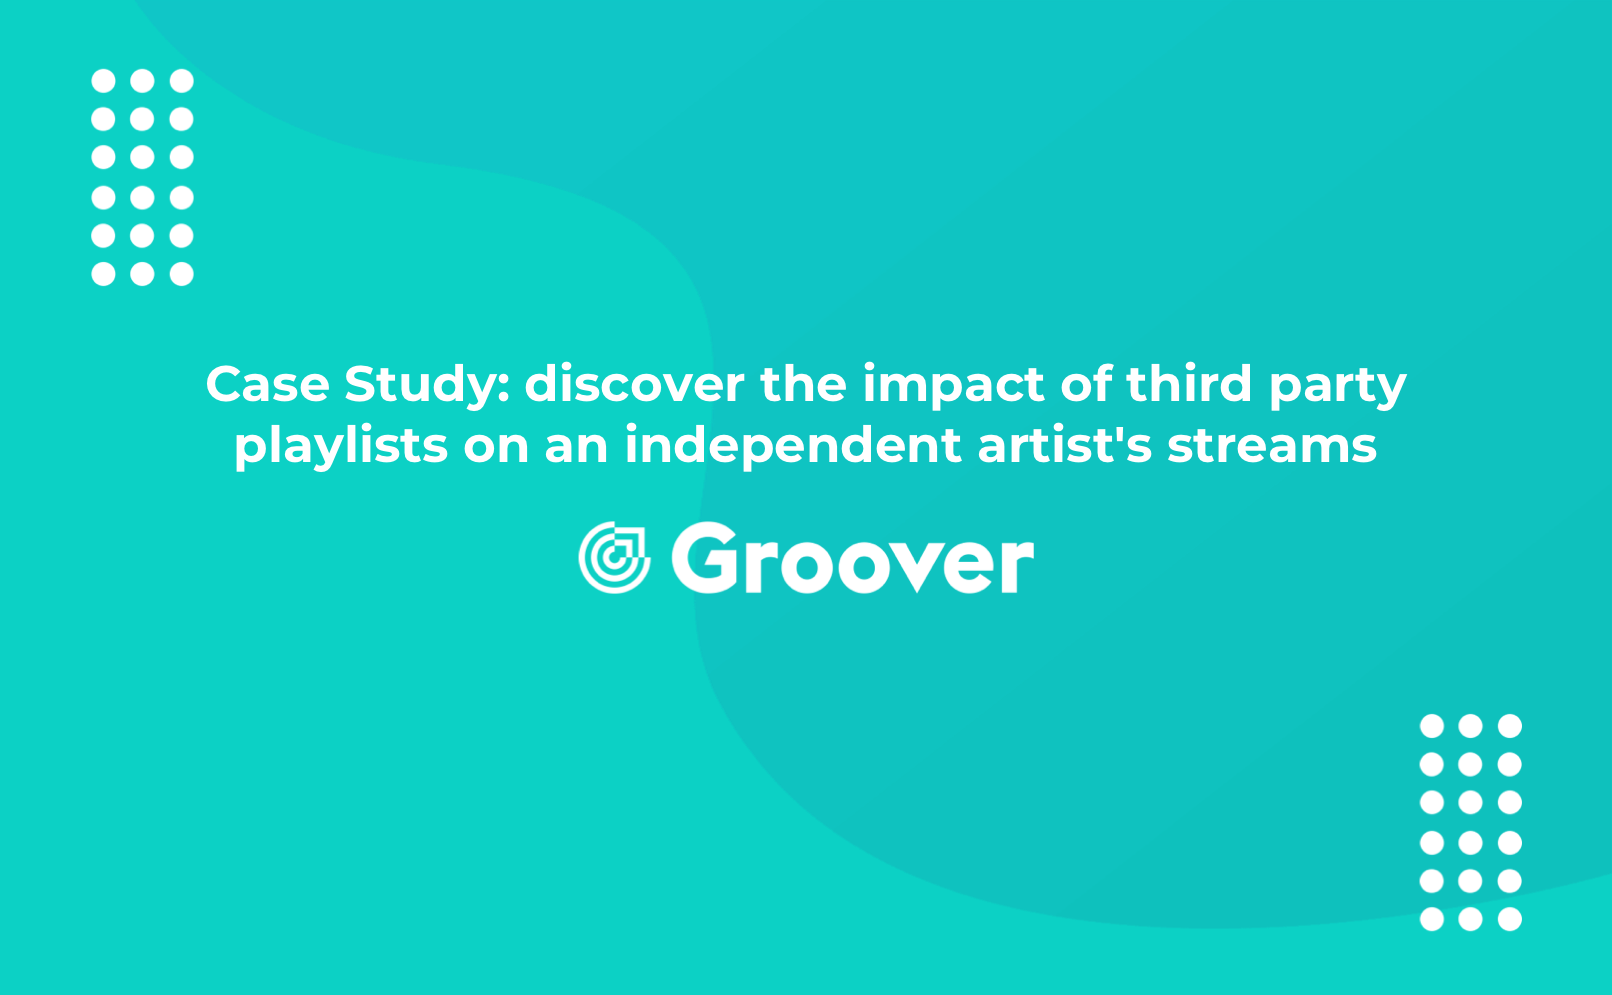 Case Study: discover the impact of third party playlists on an independent artist's streams